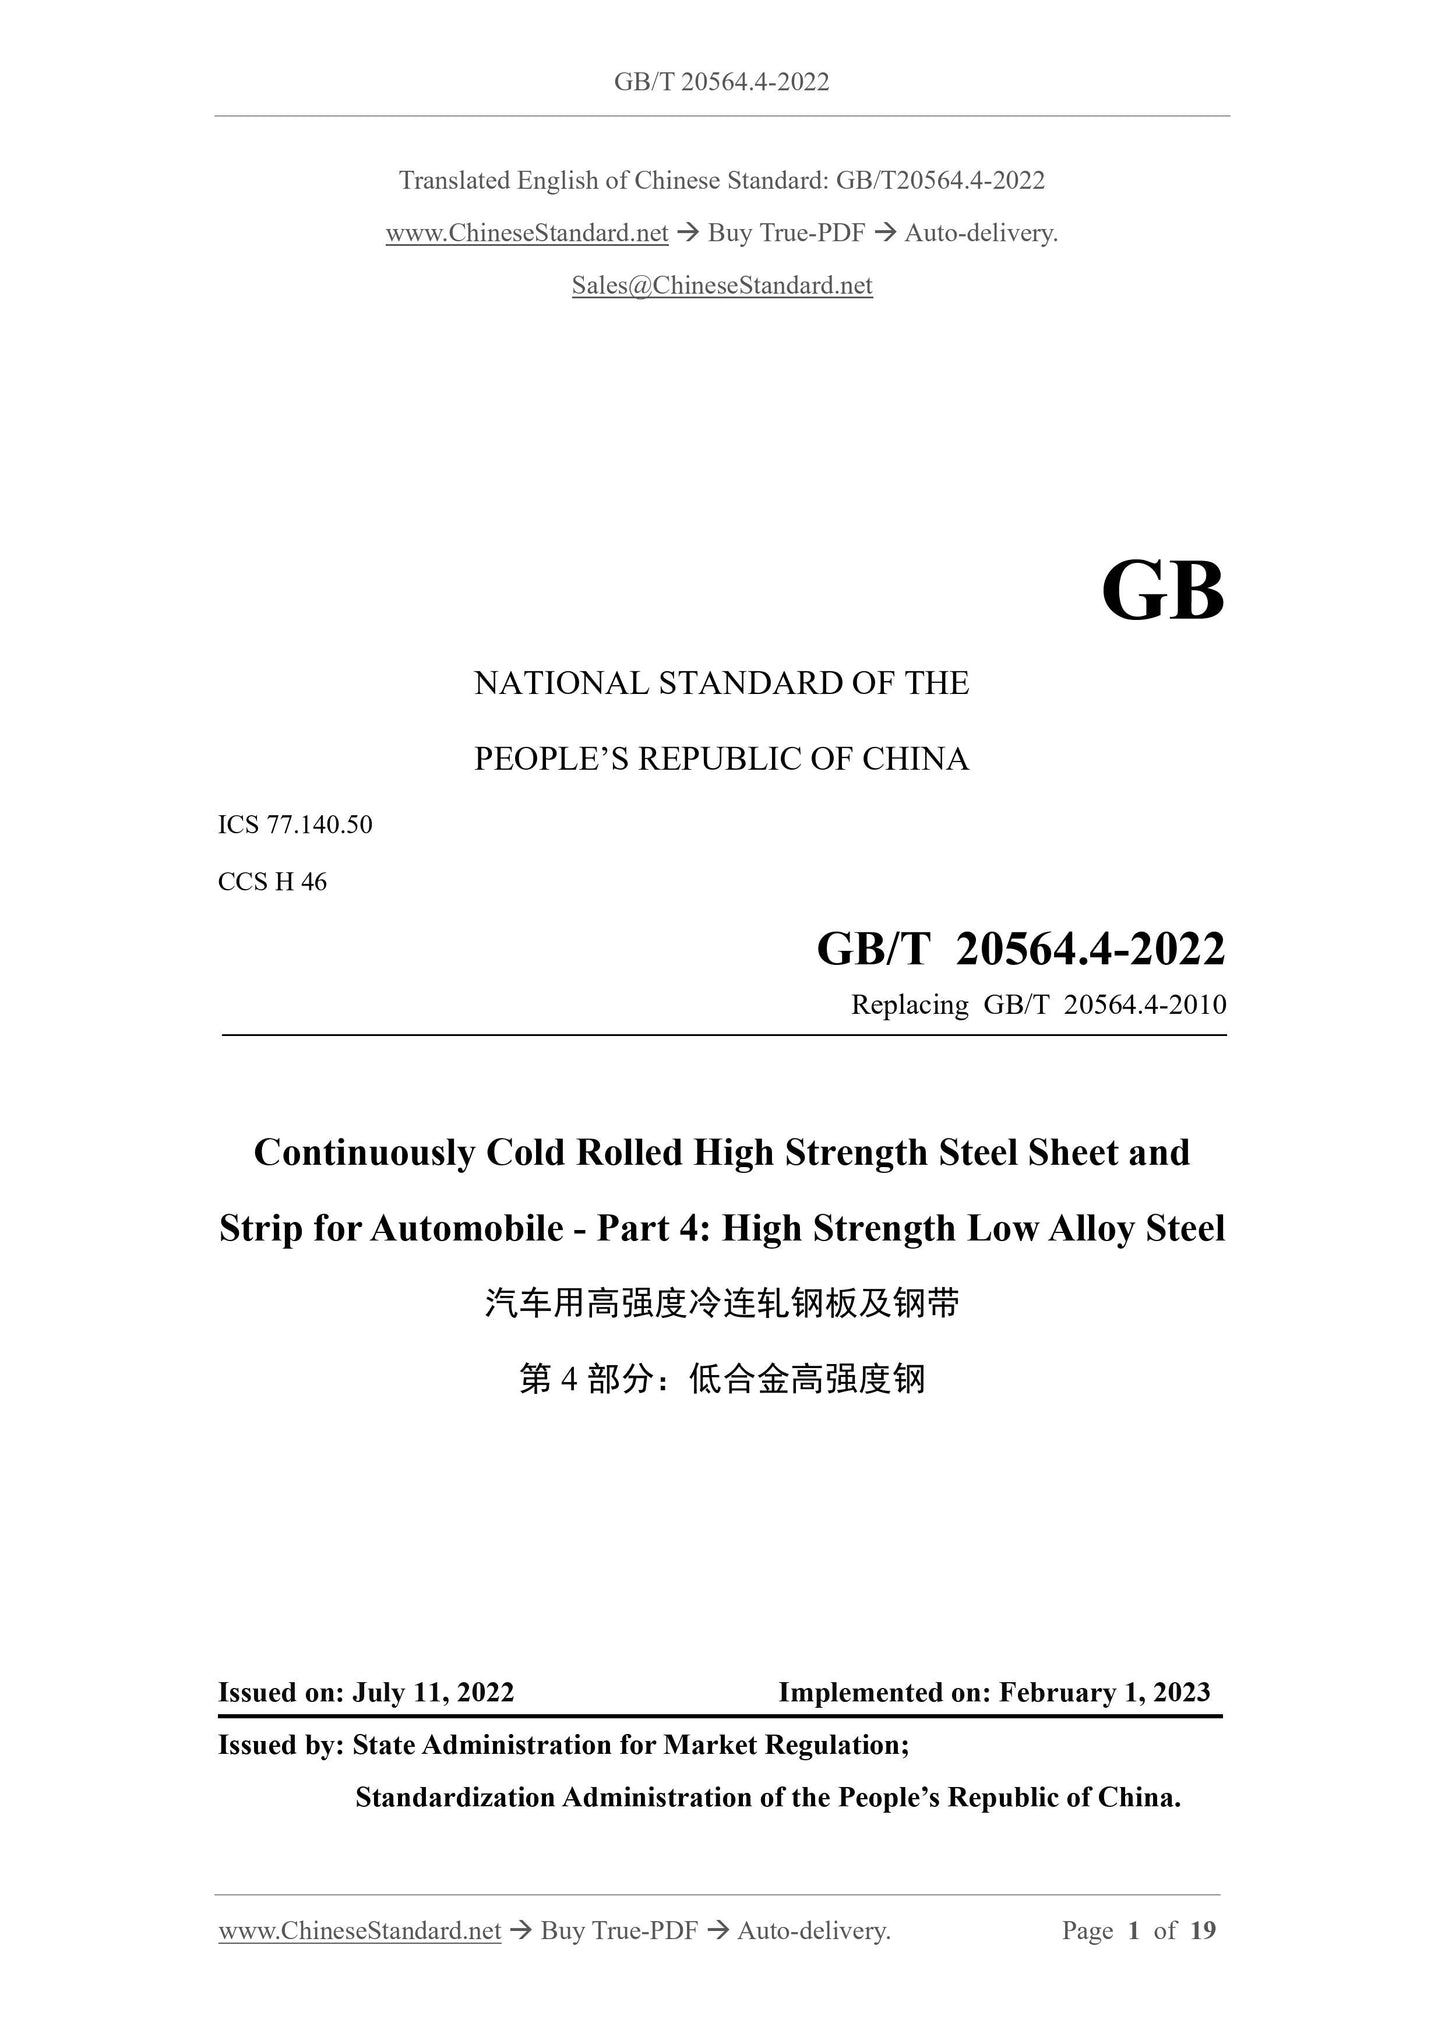 GB/T 20564.4-2022 Page 1